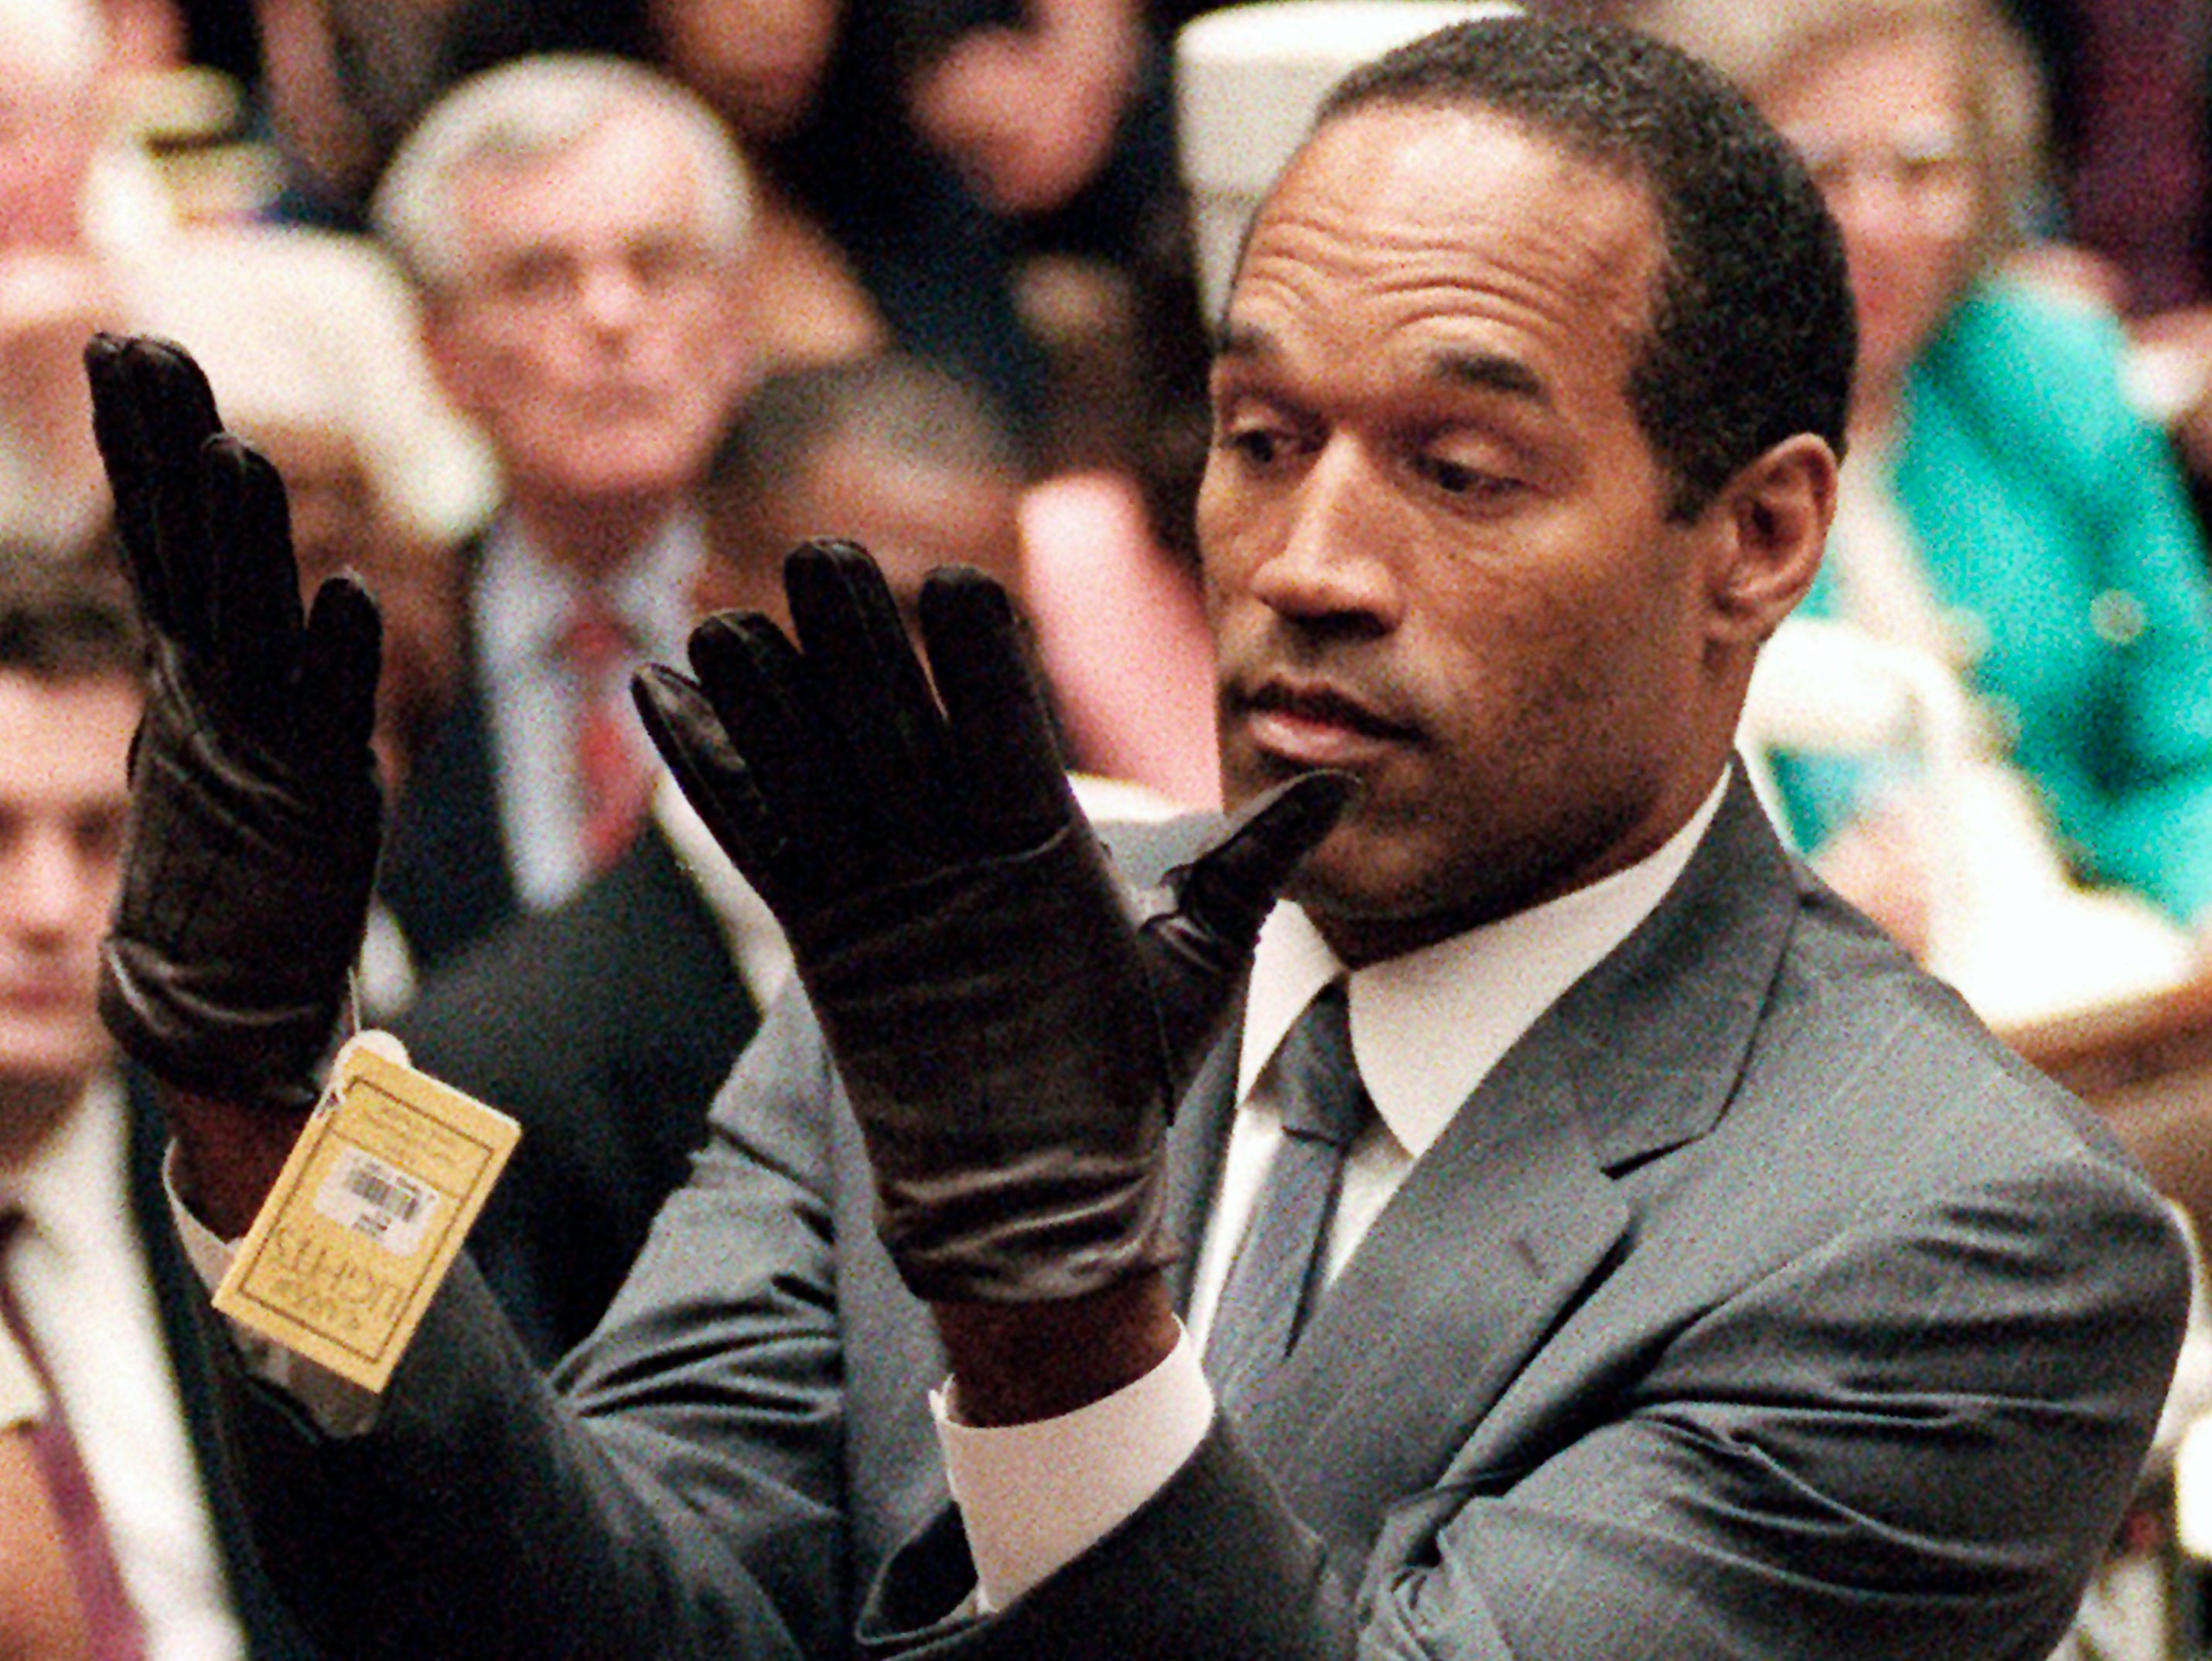 Simpson tries on gloves in court similar to those found at the murder scene